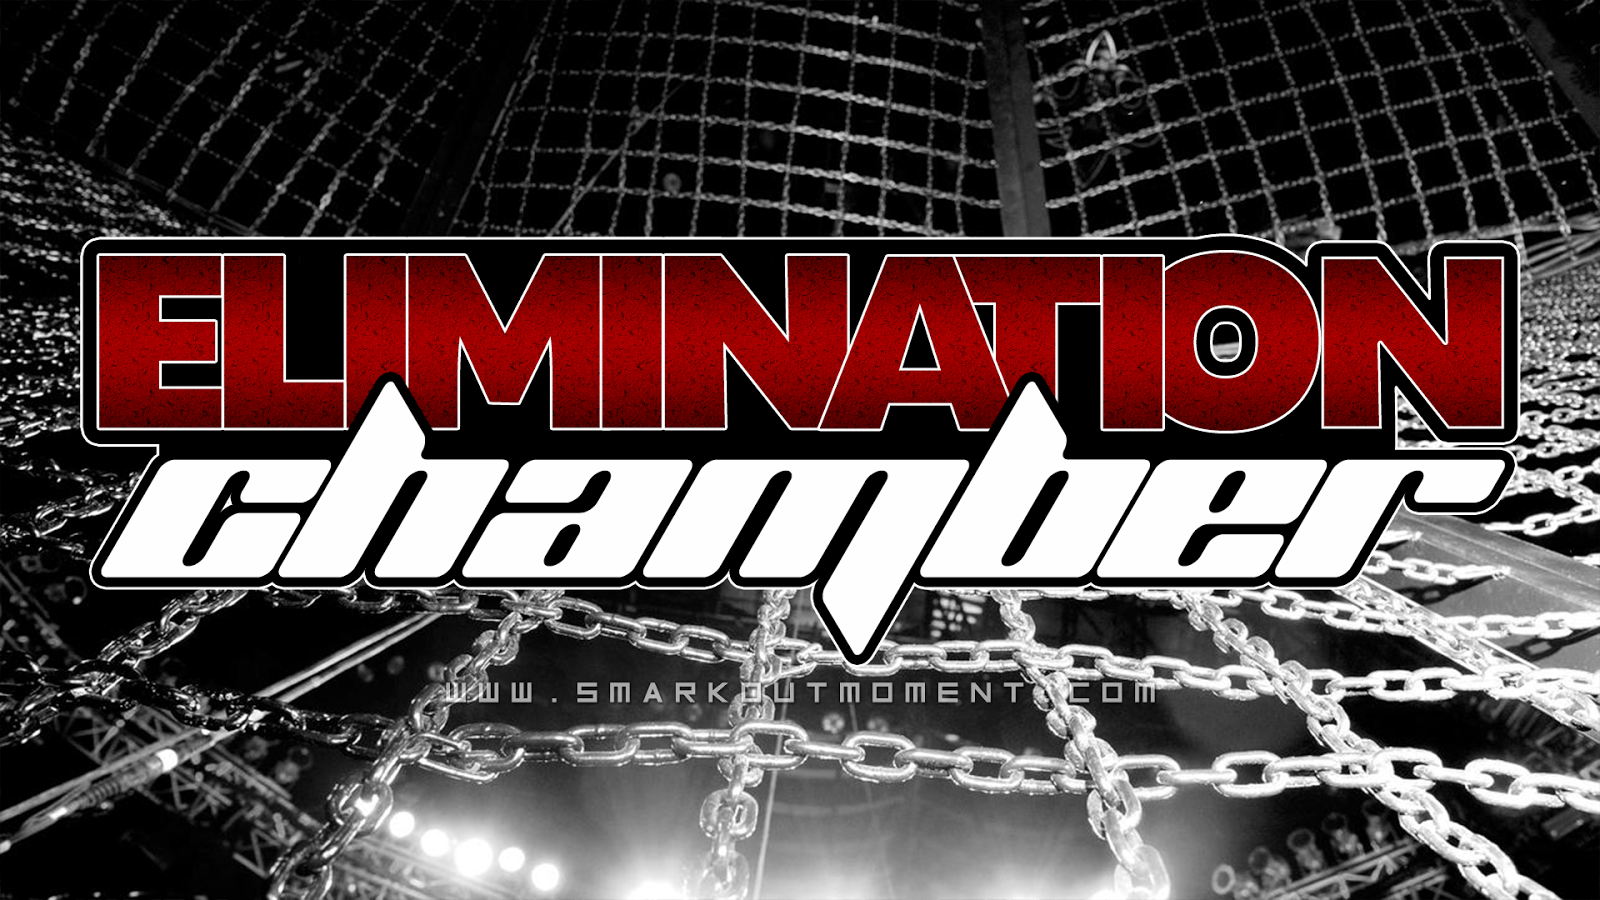 WWE Elimination Chamber PPV Wallpaper Posters and Logo Background. Smark Out Moment